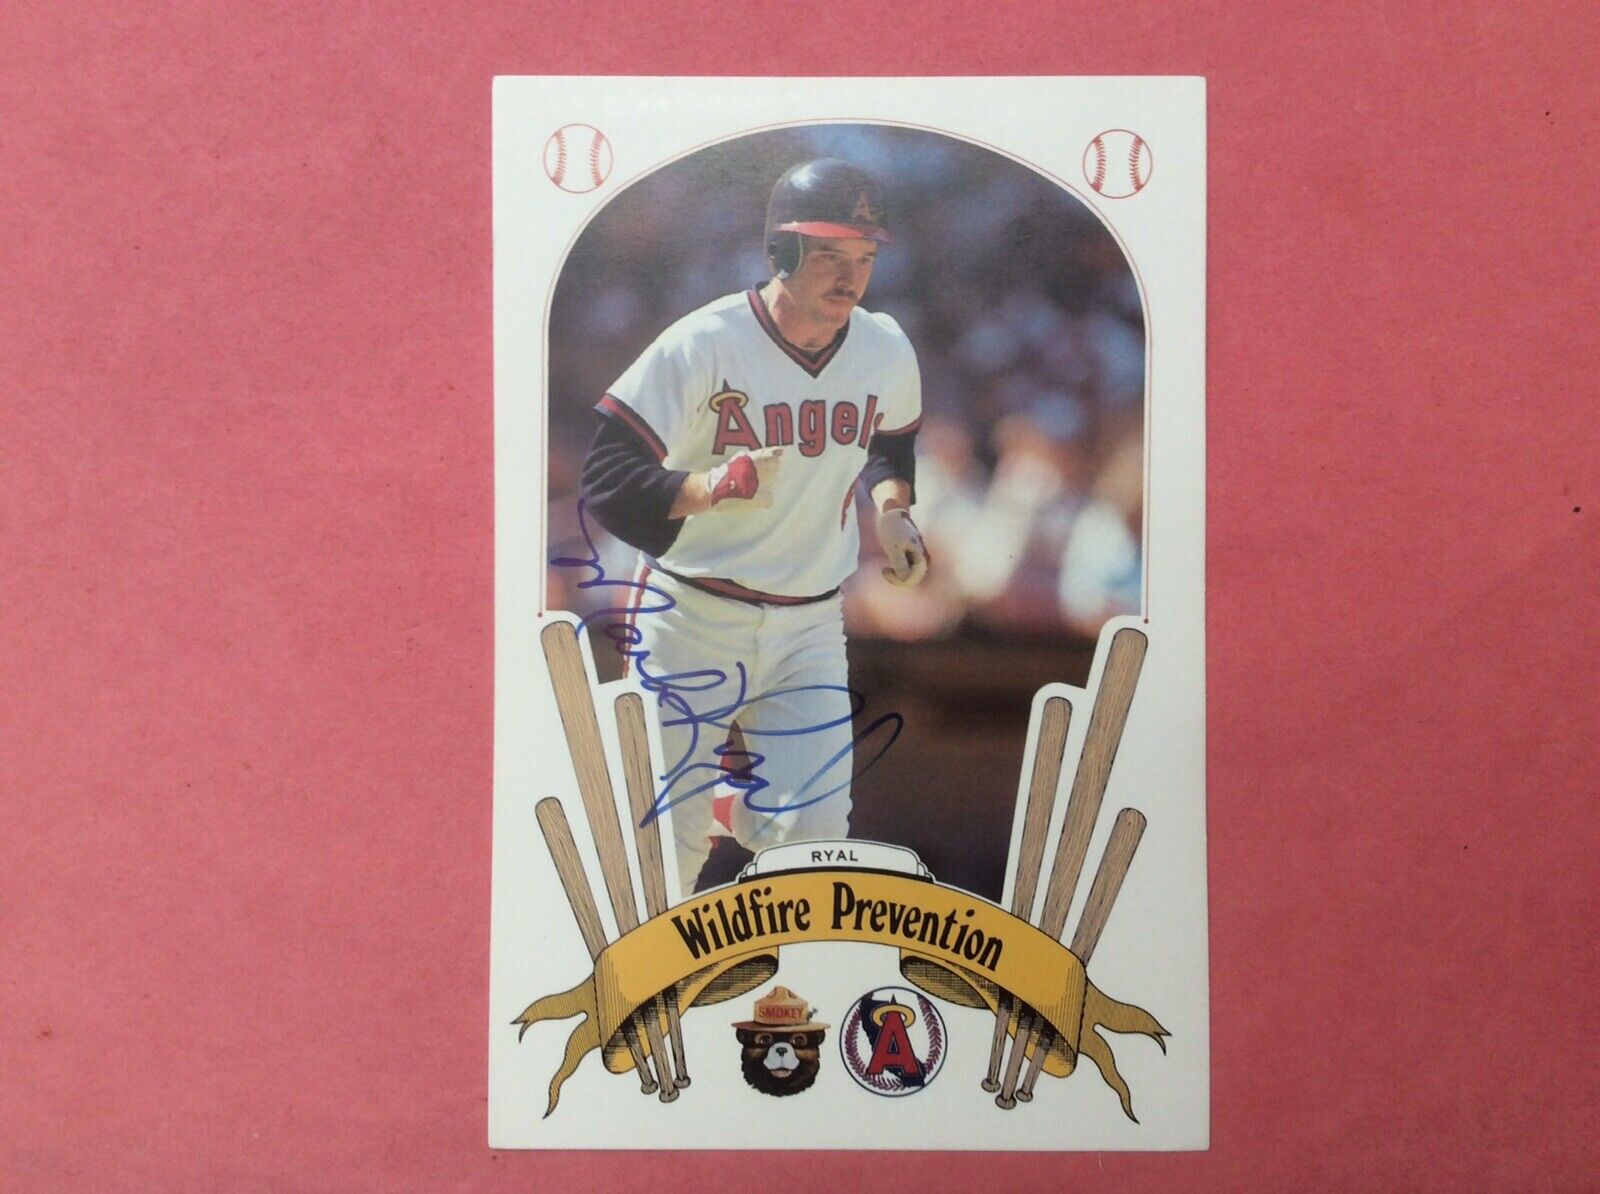 1987 Wildfire Prevention Angels #14 Mark Ryal Autograph.